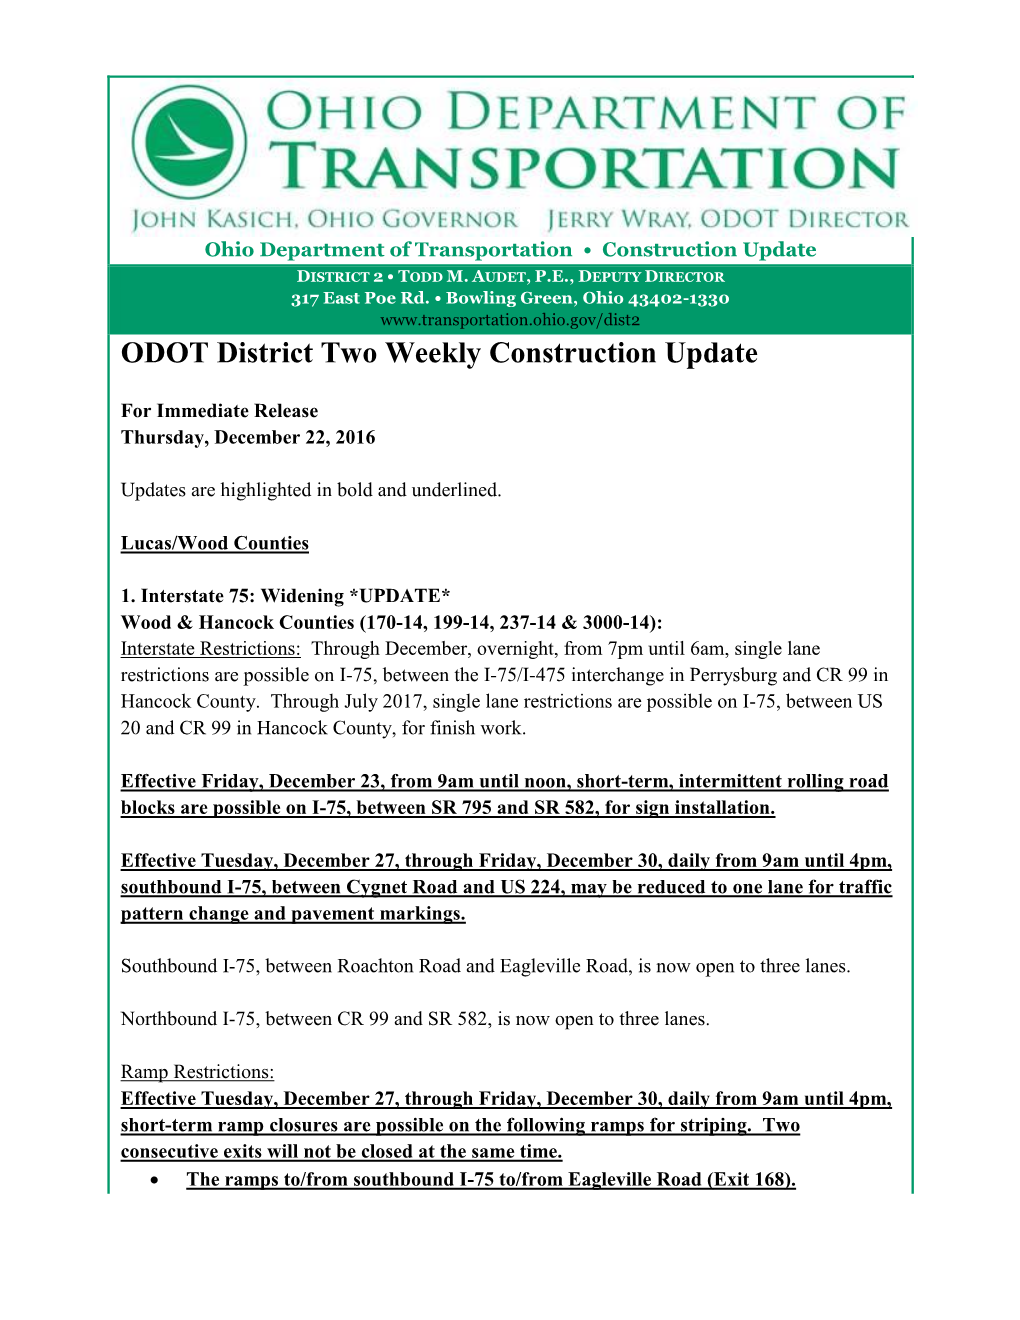 ODOT District Two Weekly Construction Update